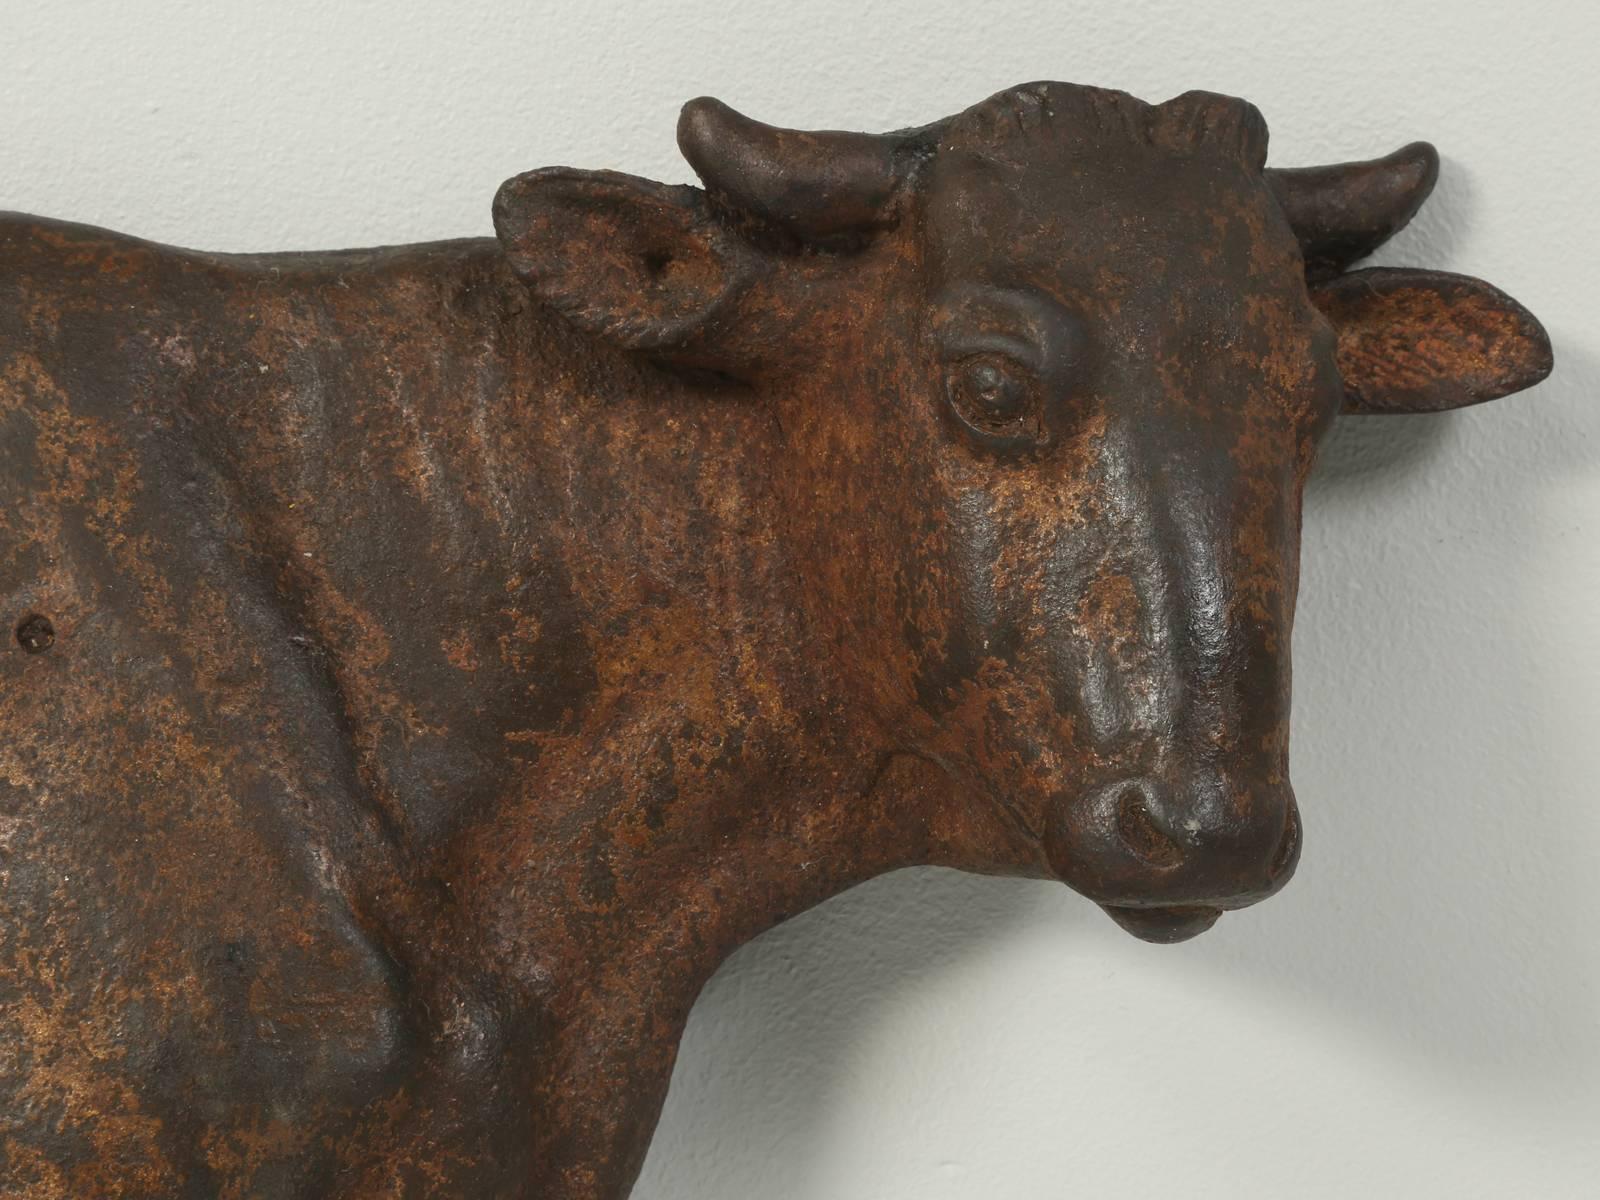 Country Antique French Steer Sign from a Butch Shop in Cast Iron